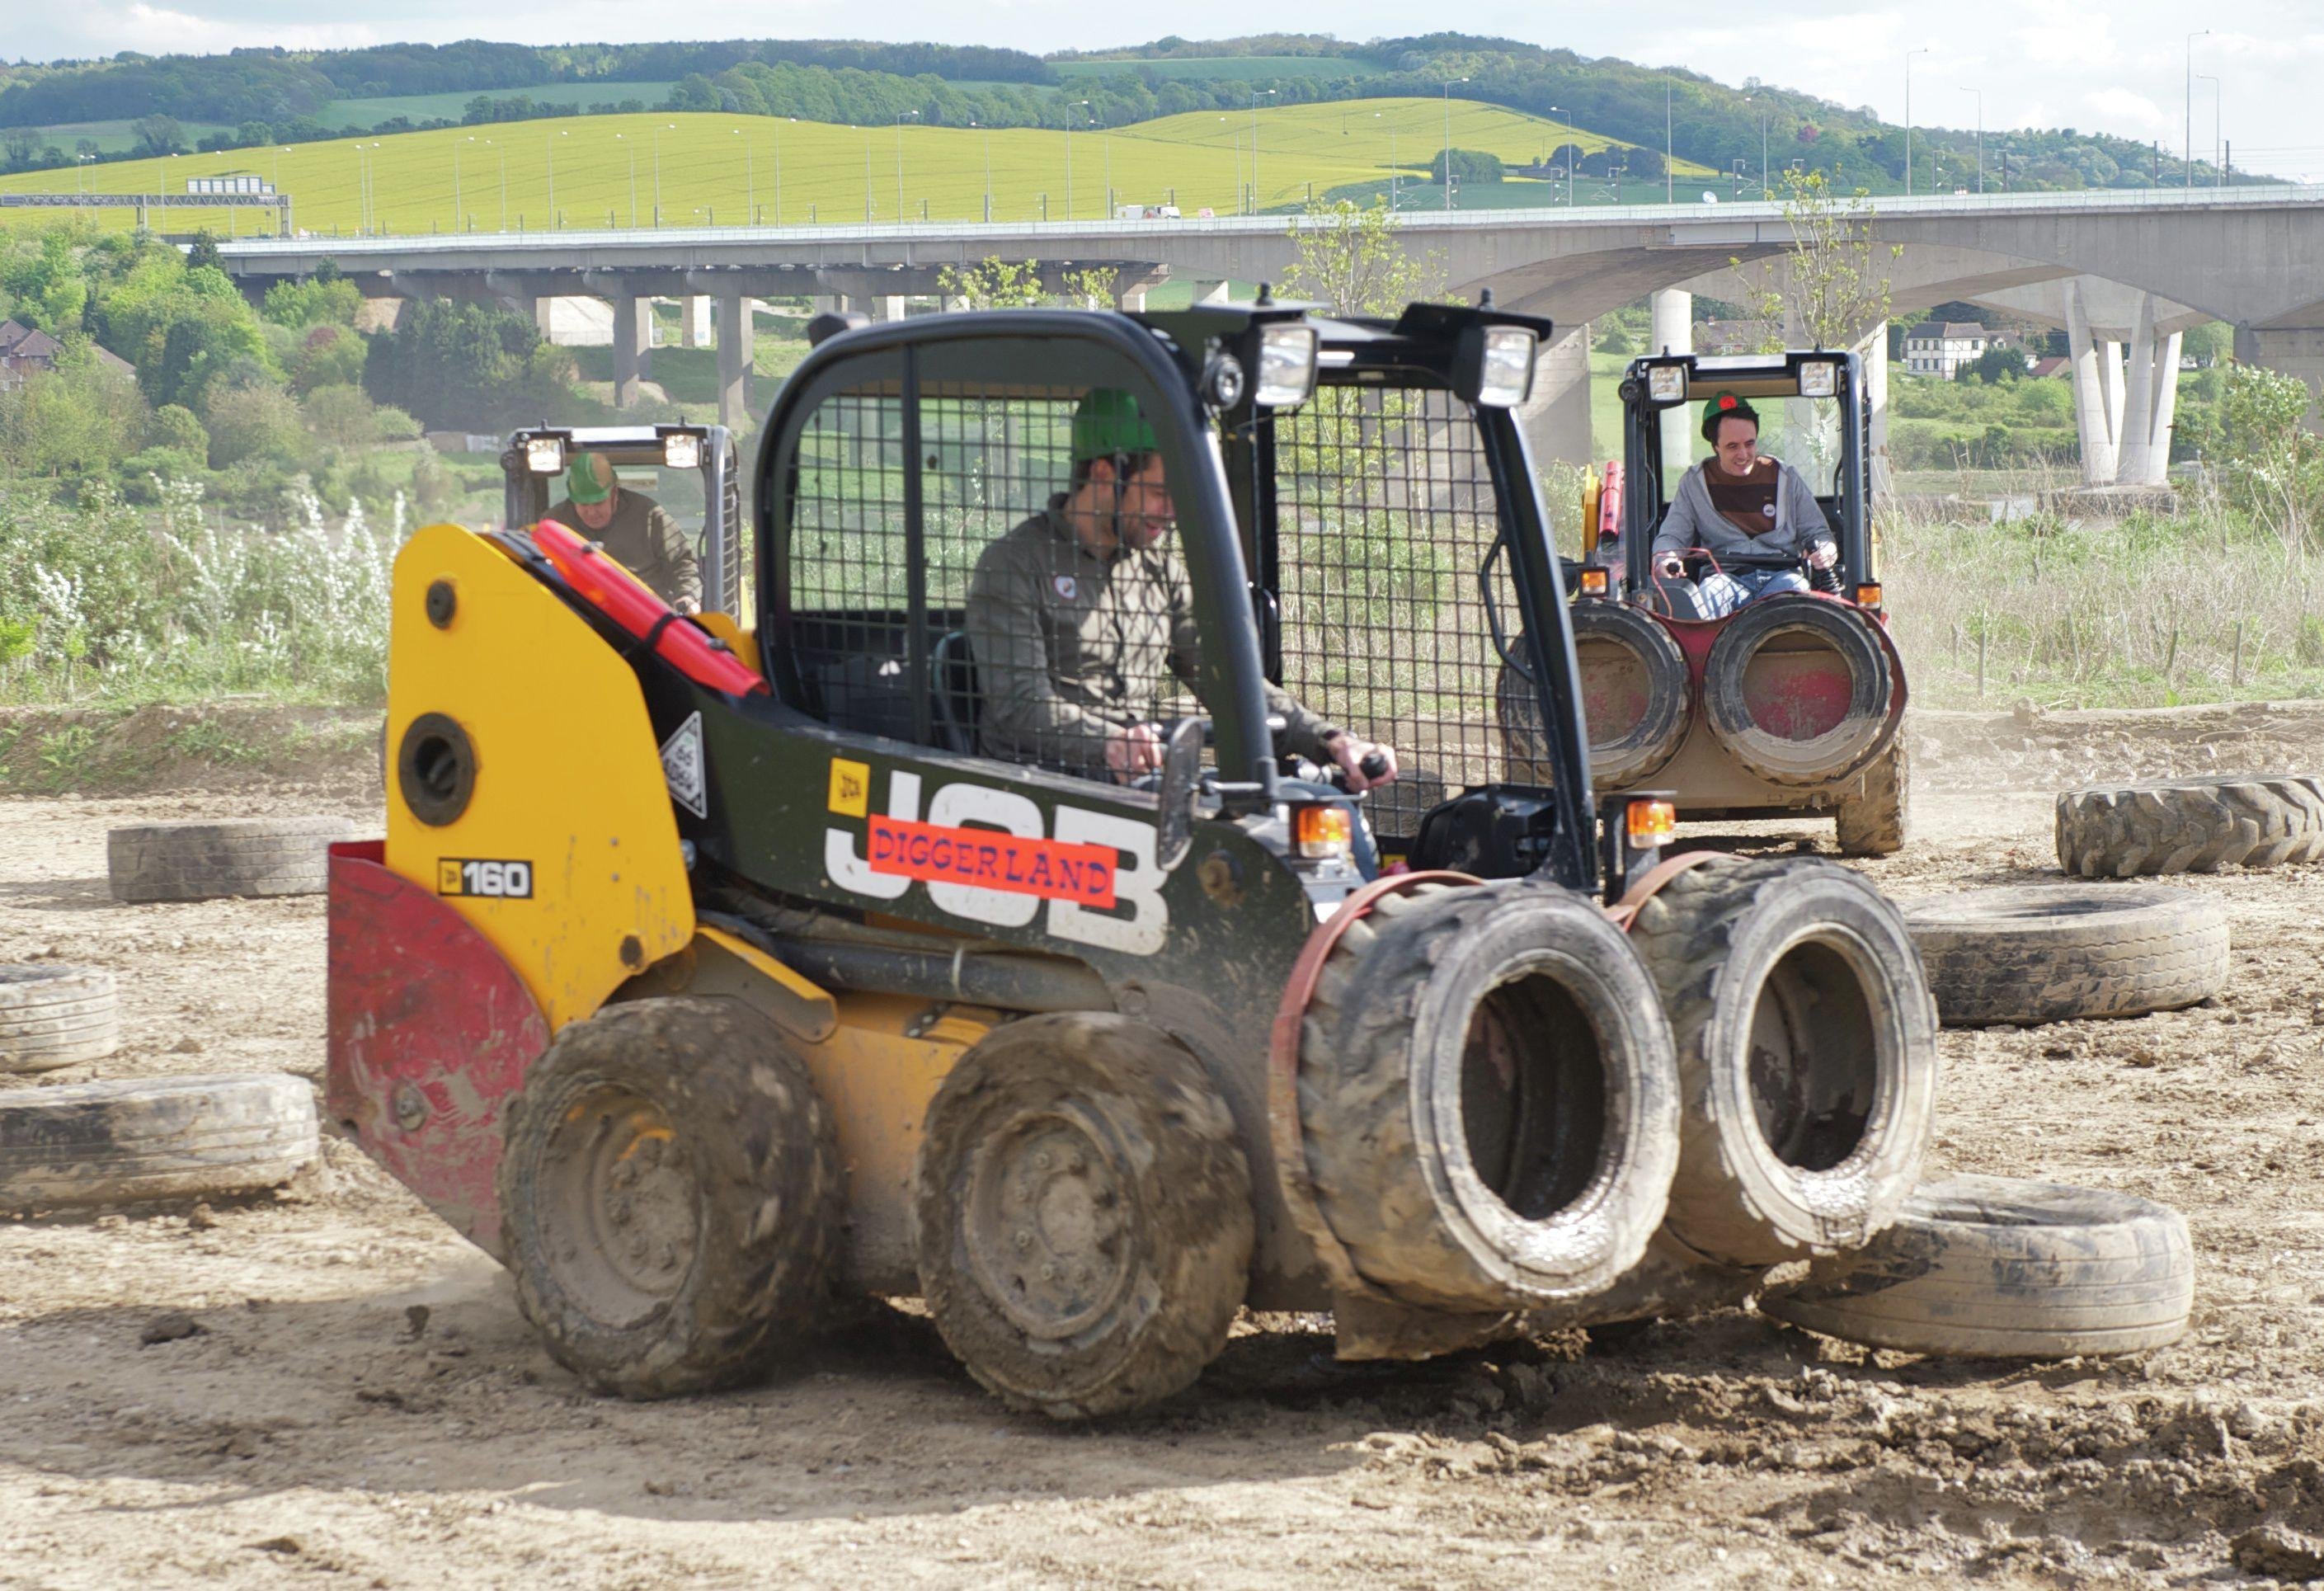 Dumper Racing for Two Gift Experience